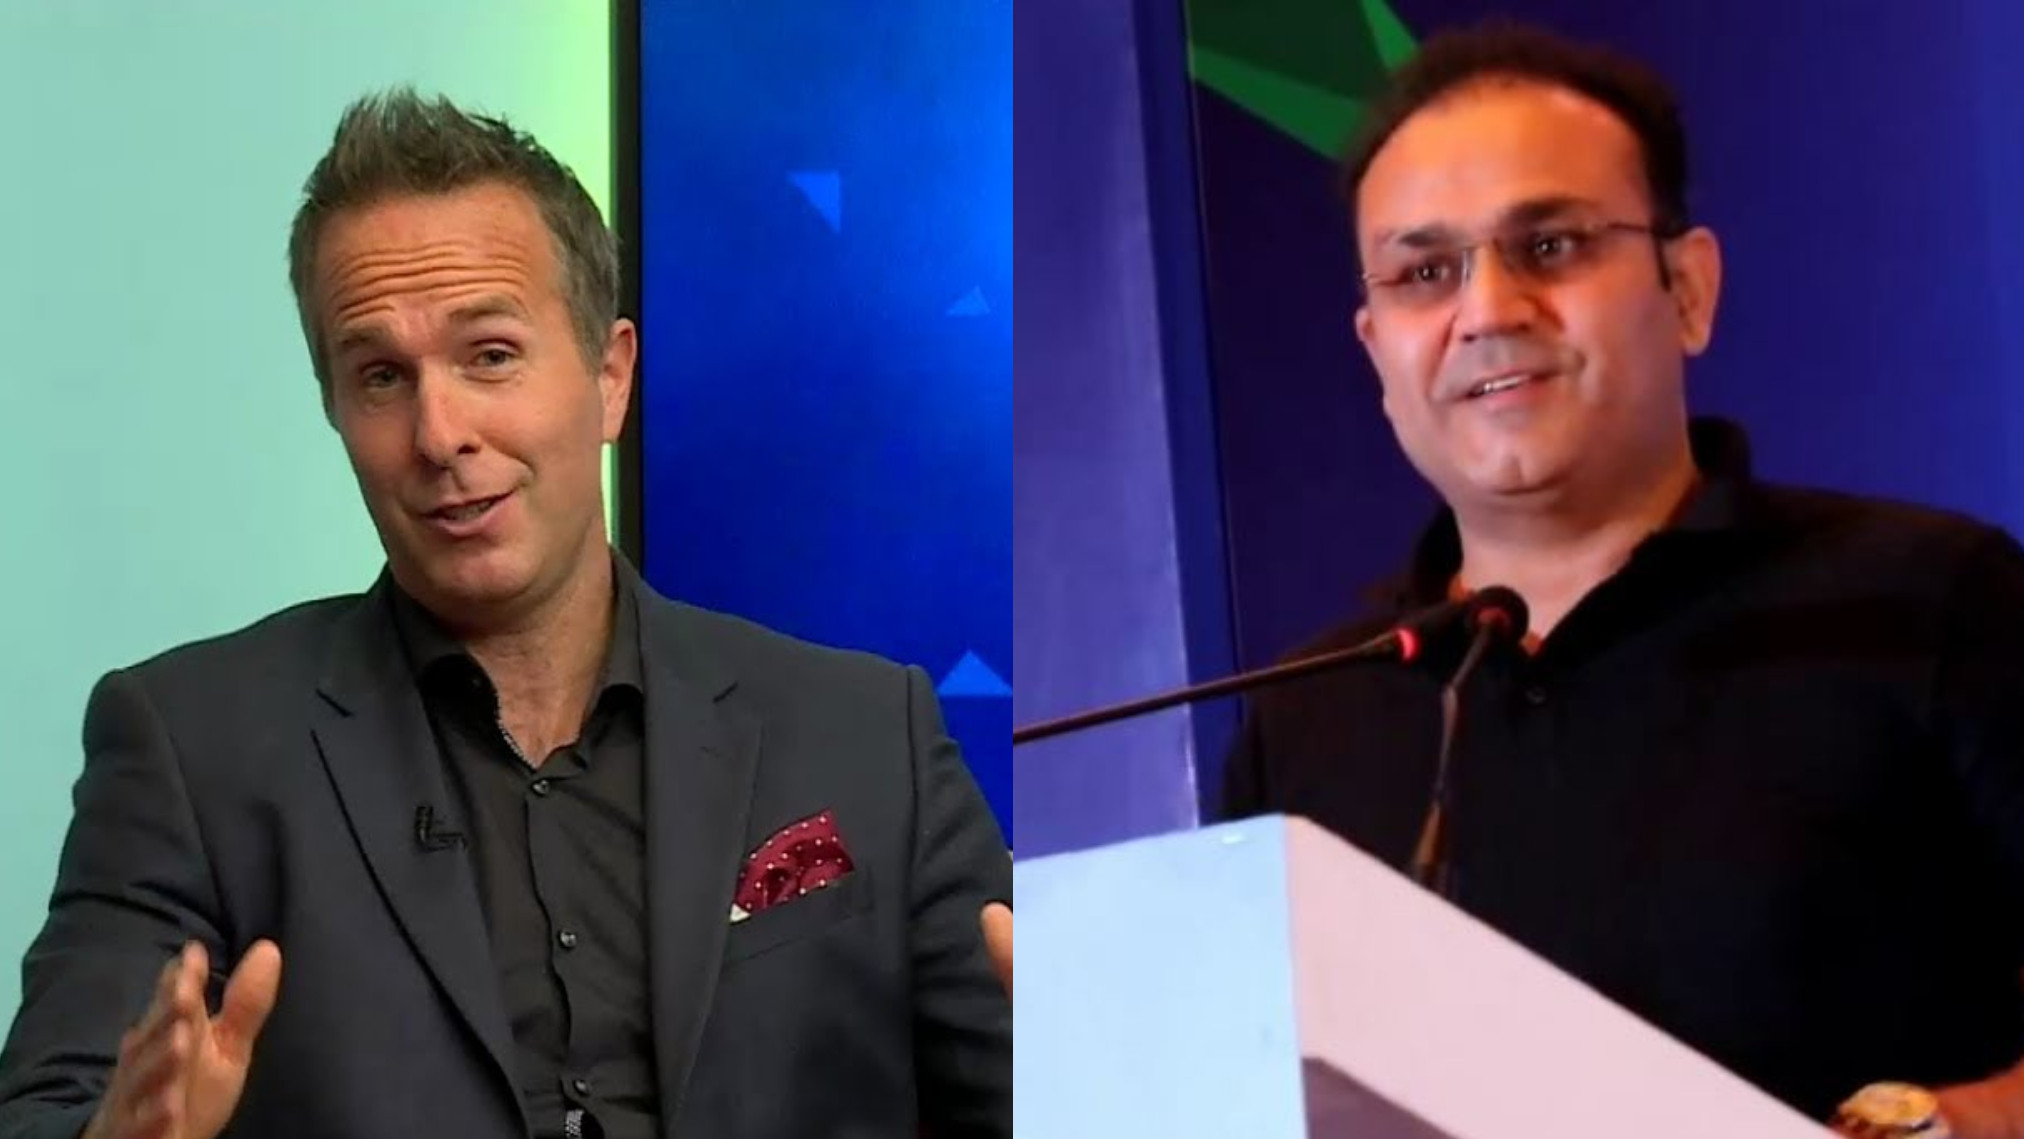 T20 World Cup 2022: Virender Sehwag and Michael Vaughan pick this batter to top score In this edition of tournament